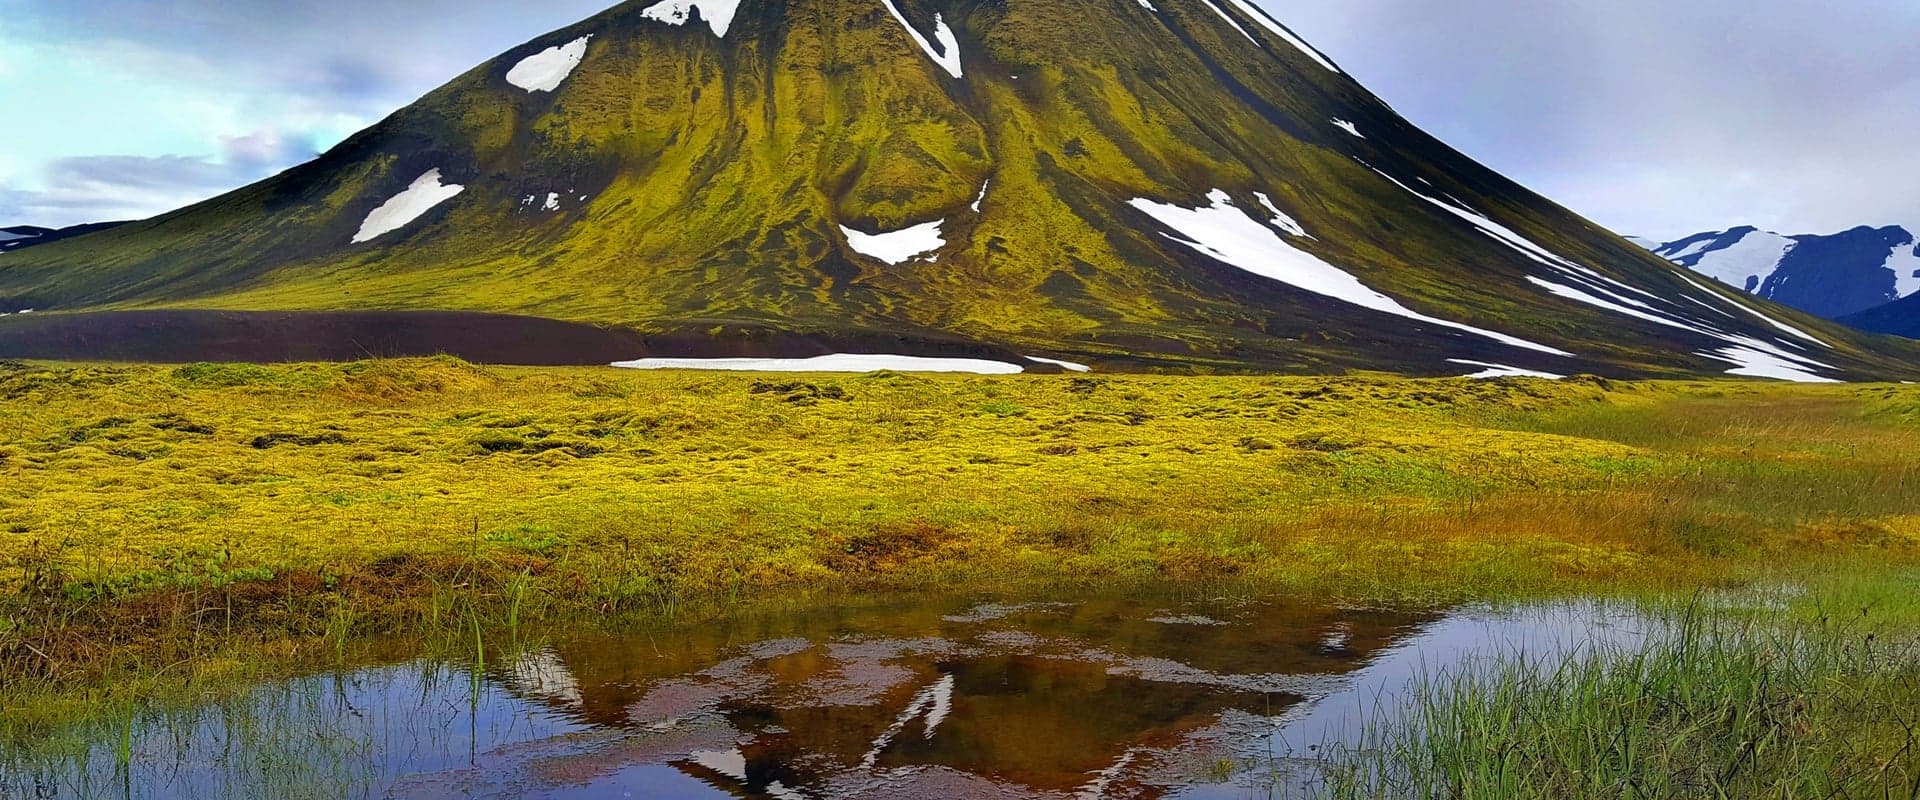 Magical Iceland: Living on the World's Largest Volcanic Island